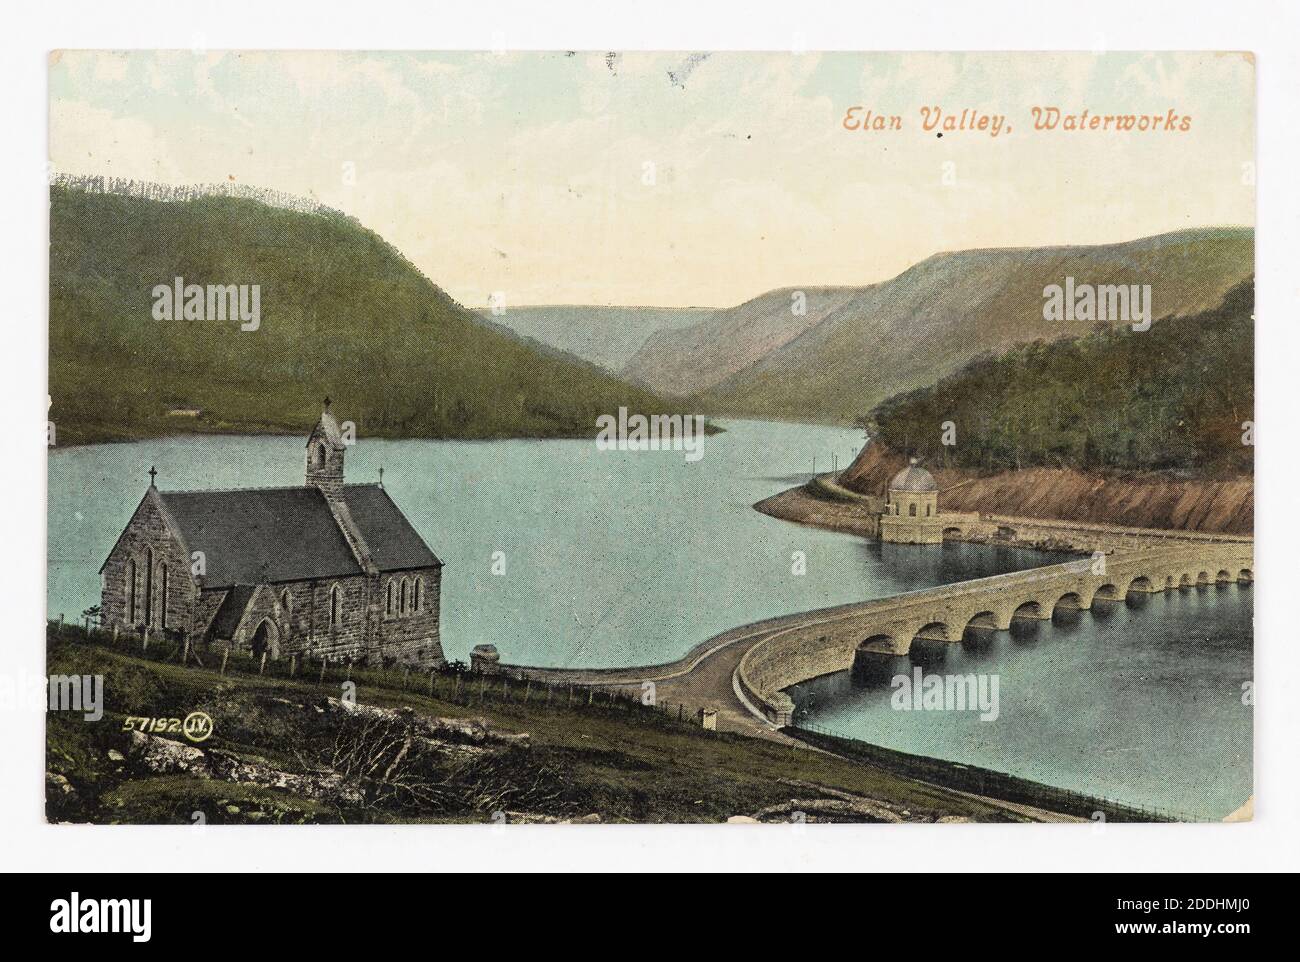 Postcard, Birmingham Waterworks, Elan Valley, Wales, 1908 Topographical Views, View of Caban Dam and reservoir supplying the city of Birmingham with drinking water, Lake, Social history, Wales, Birmingham history, Postcard Stock Photo